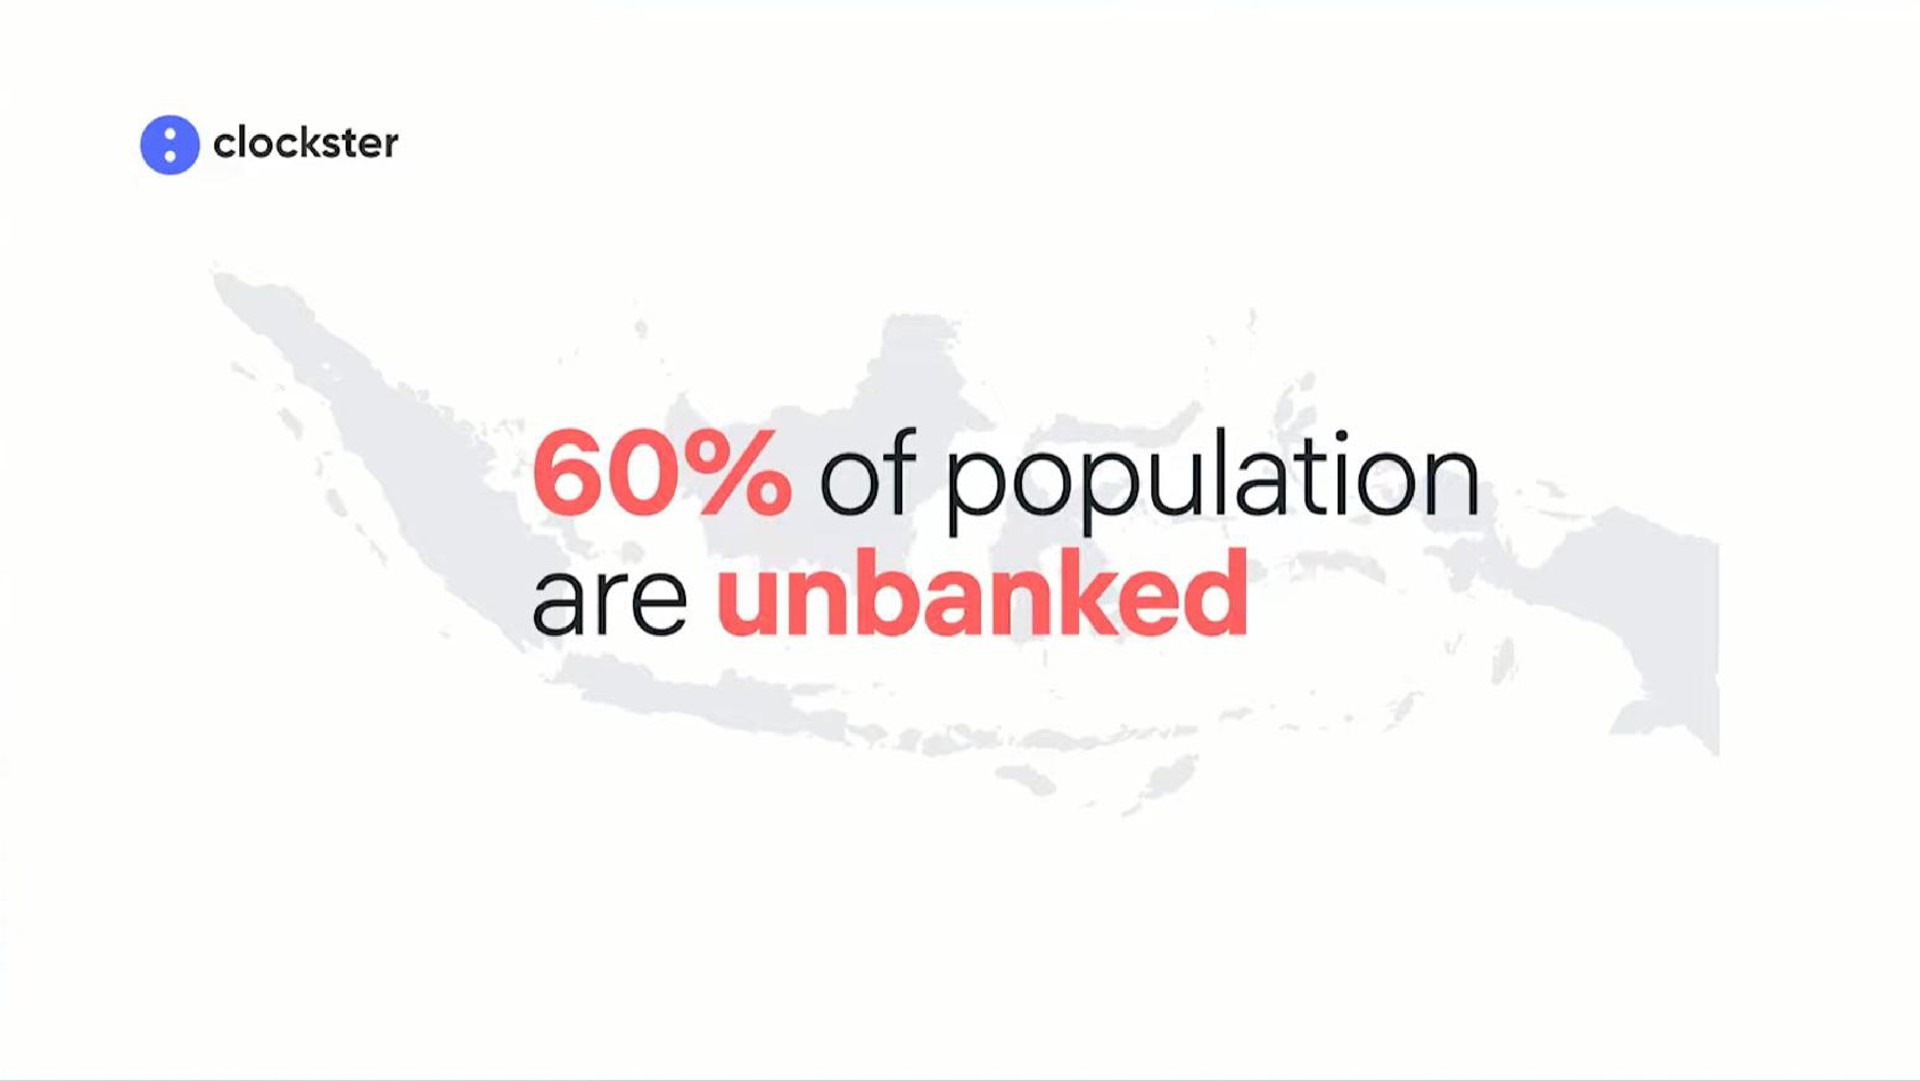 of population are unbanked | Clockster